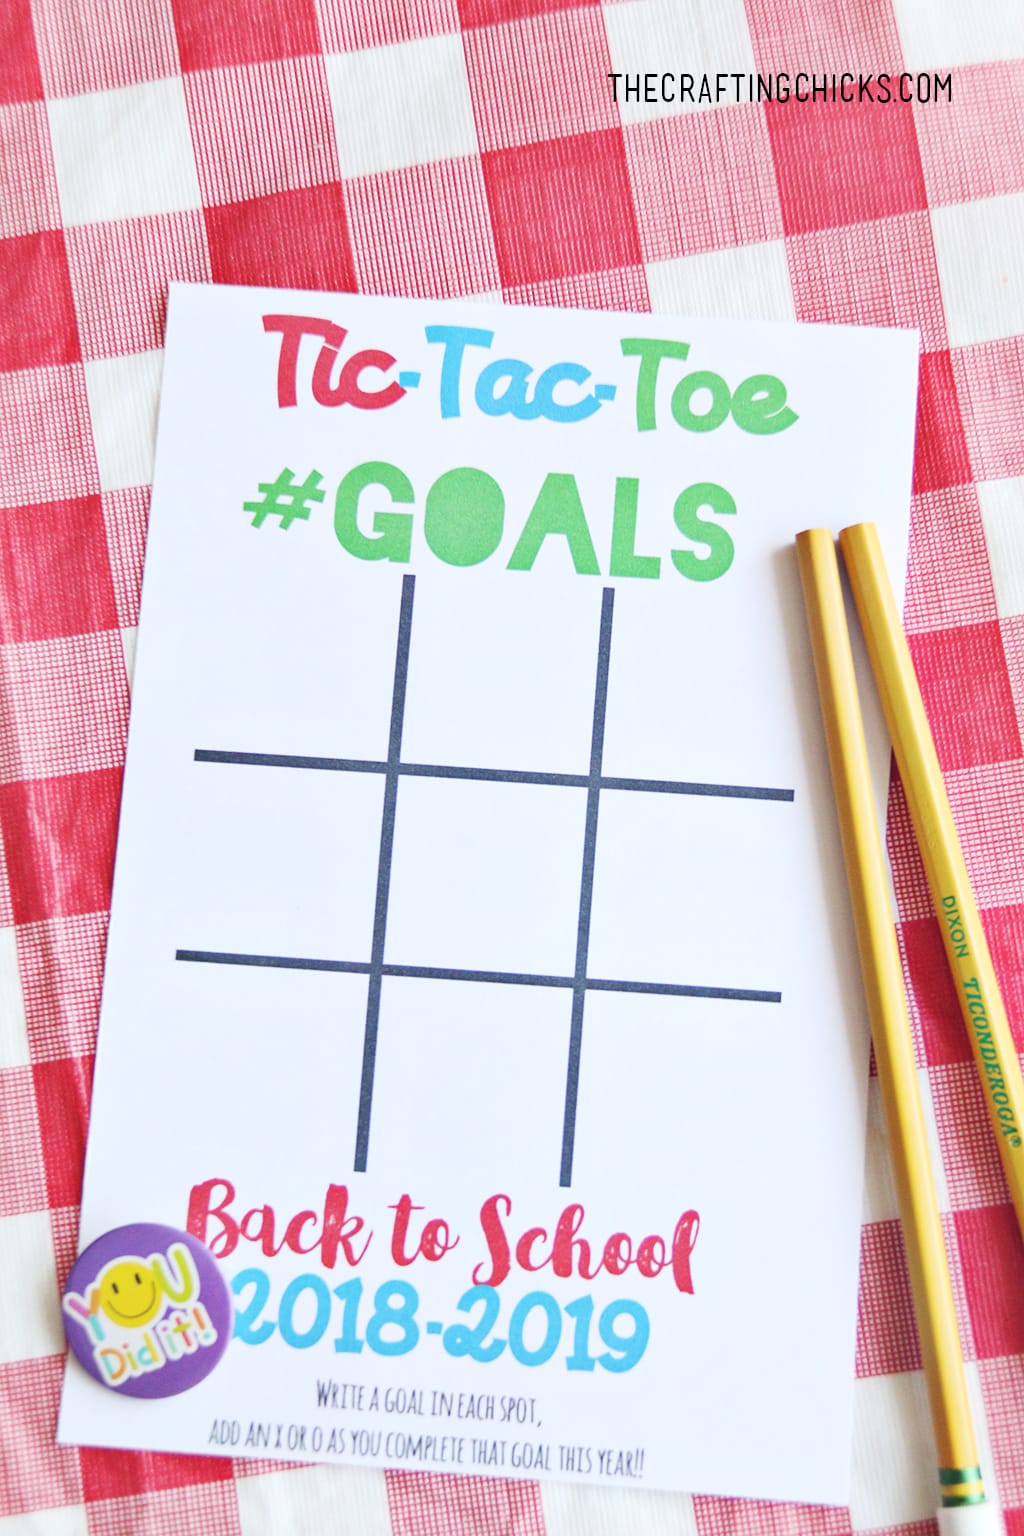 Back to School Goal Setting Tic-Tac-Toe printable with pencils on table